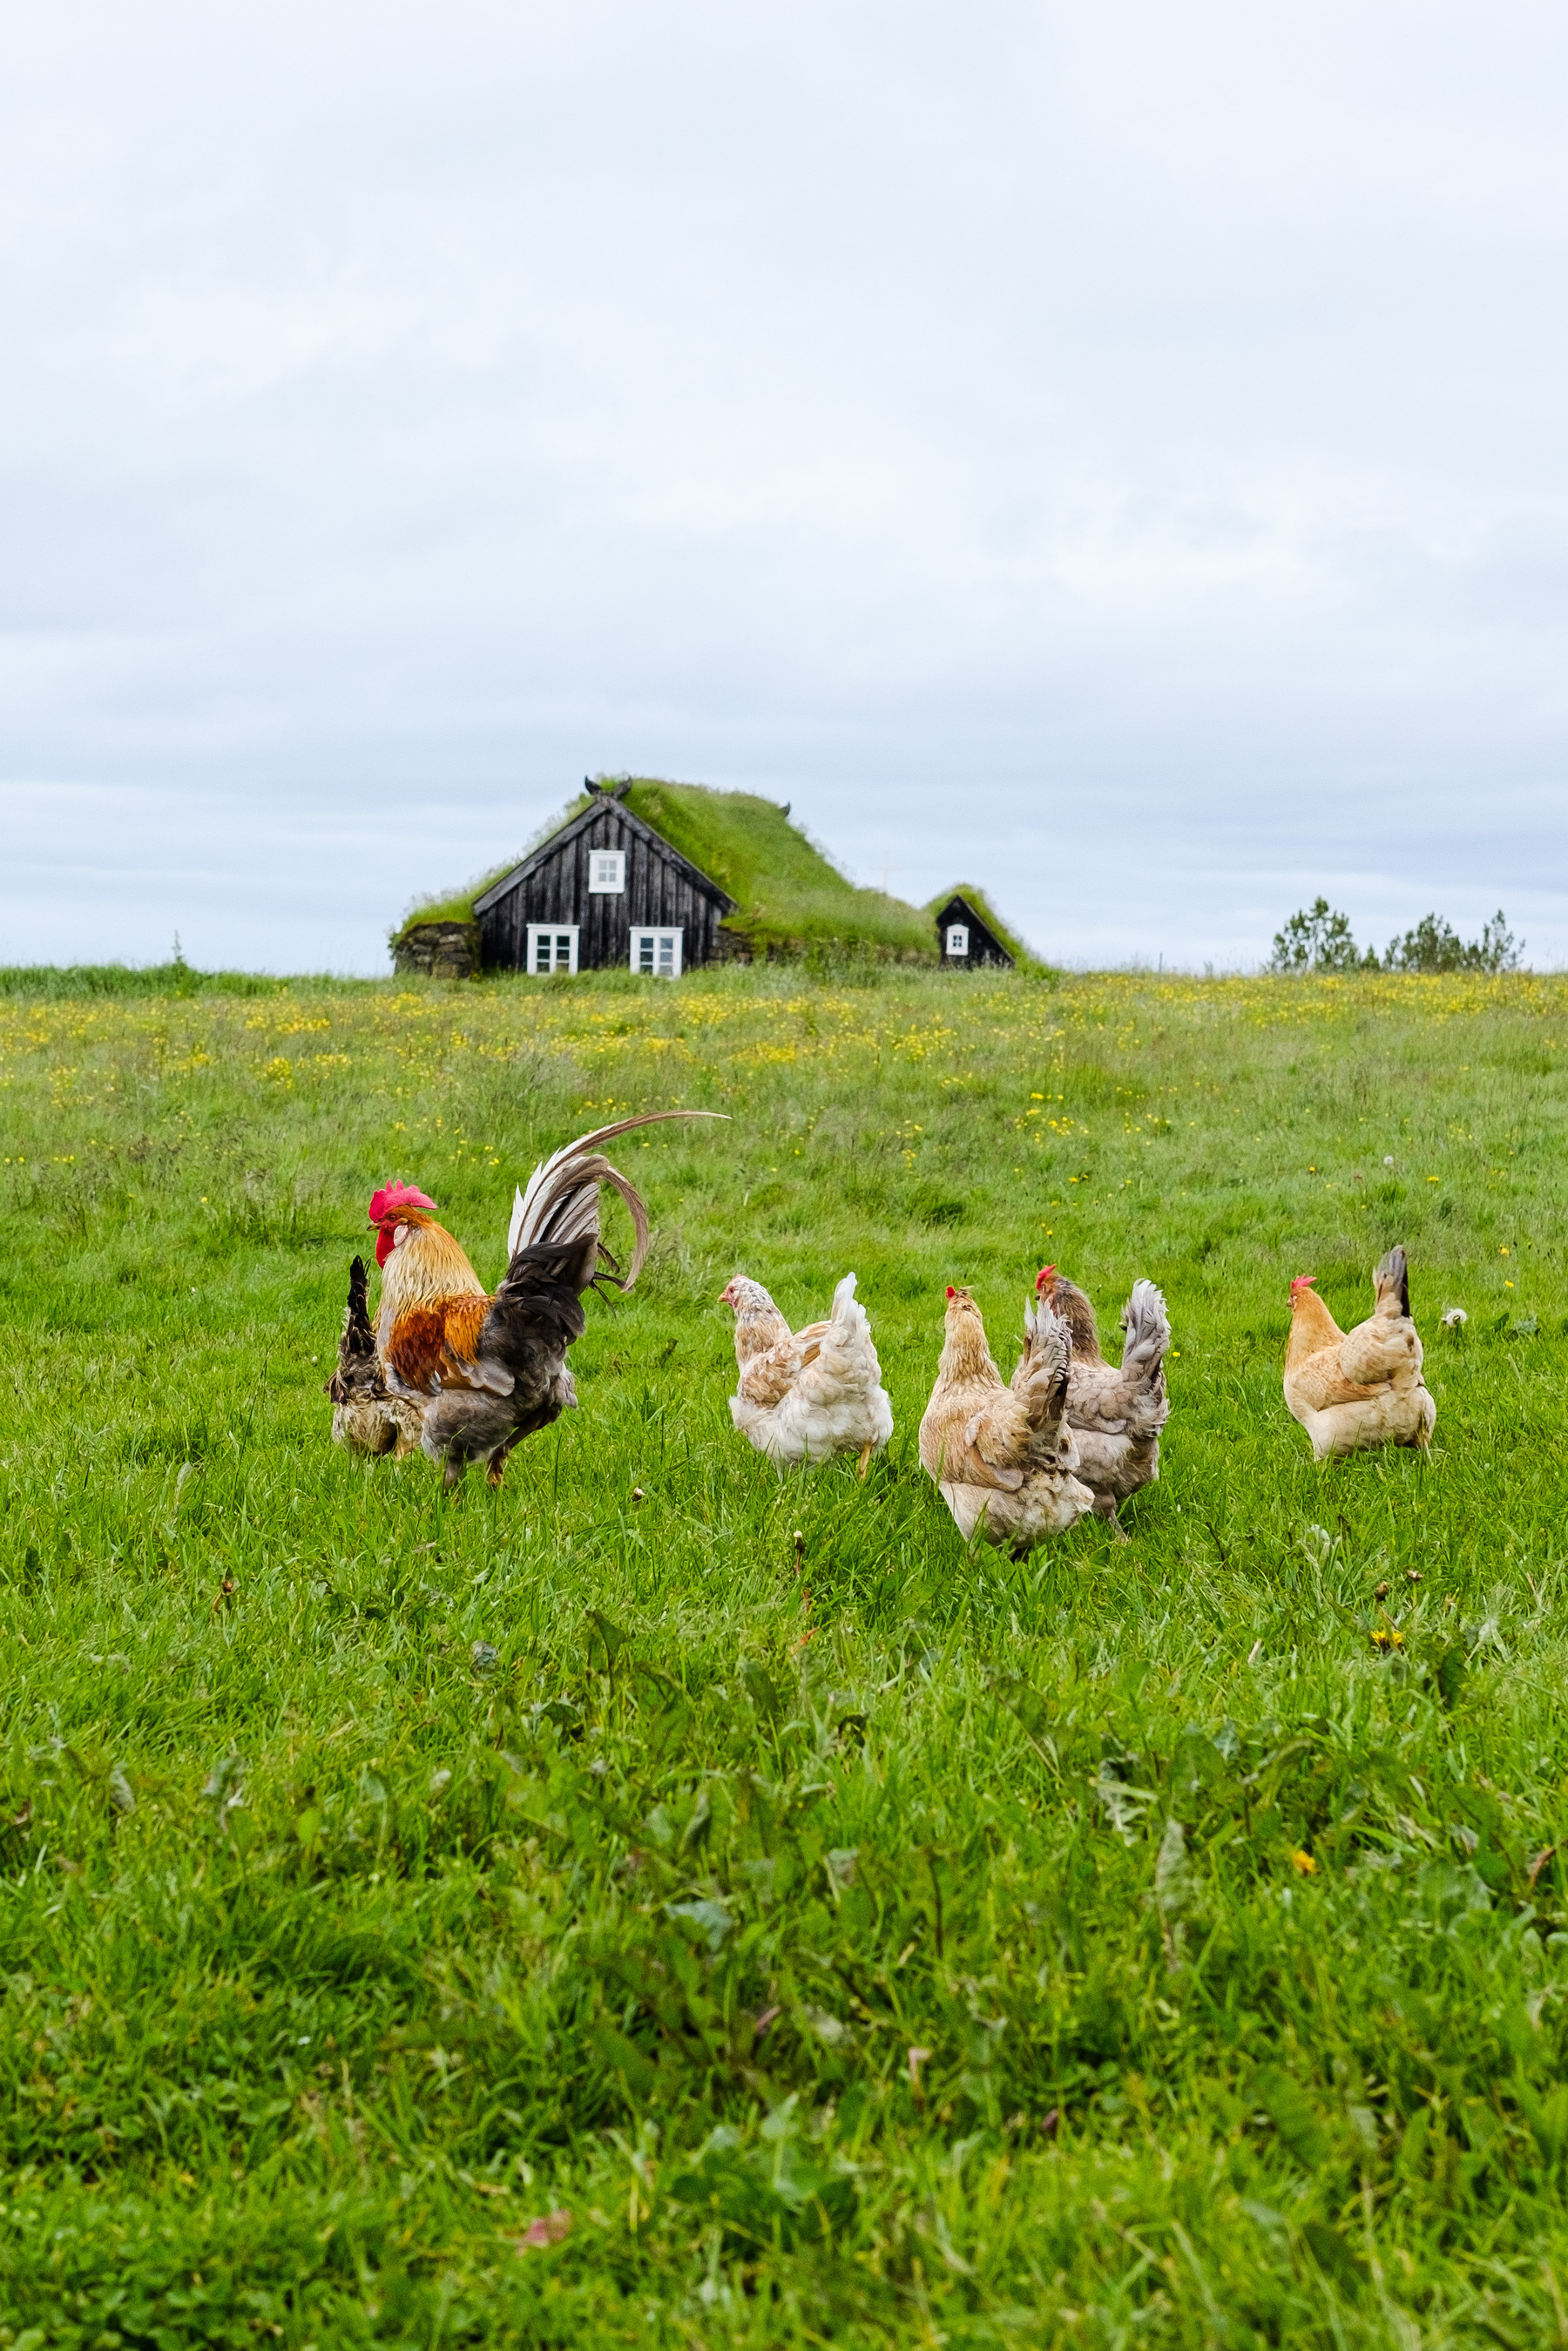 A photo taken in Árbæjarsafn which is a museum dedicated to Iceland’s architectural history. The chickens are “landnámshænur” which is said to be the original viking breed of chicken.